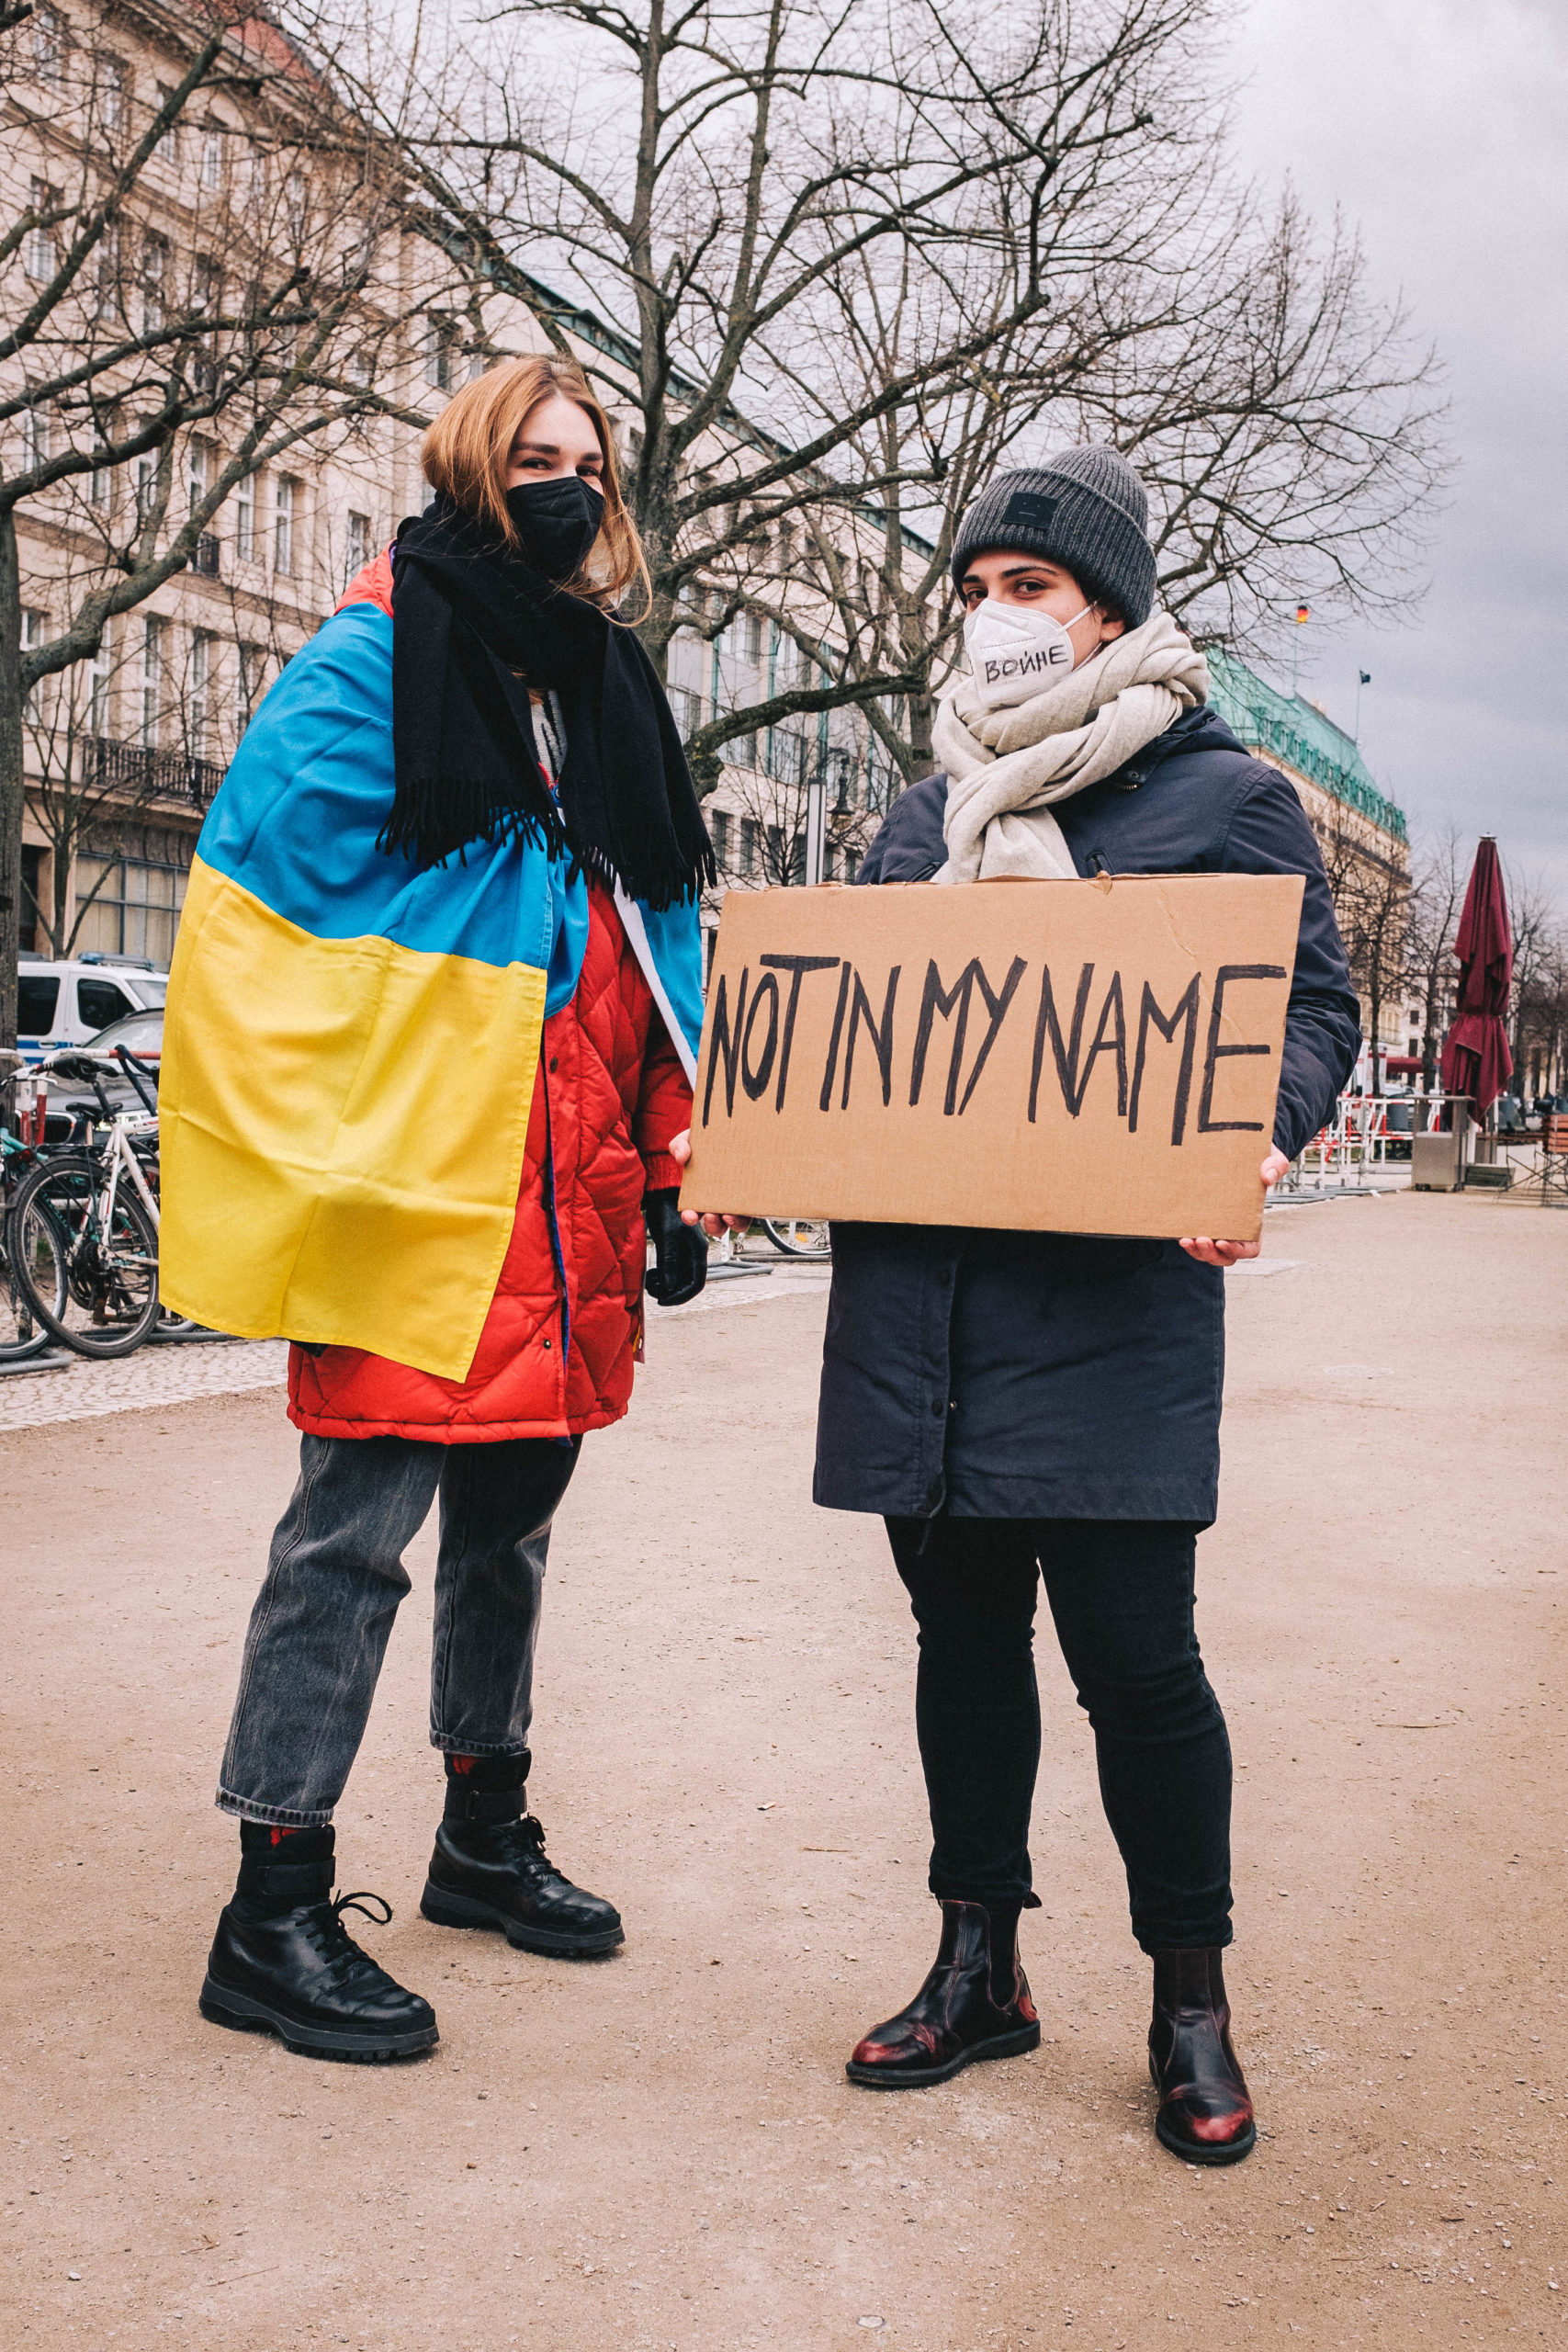 A protester draped in Ukrainian flag talking to another with a sign that reads: "NOT IN MY NAME" outside the russian embassy in Berlin